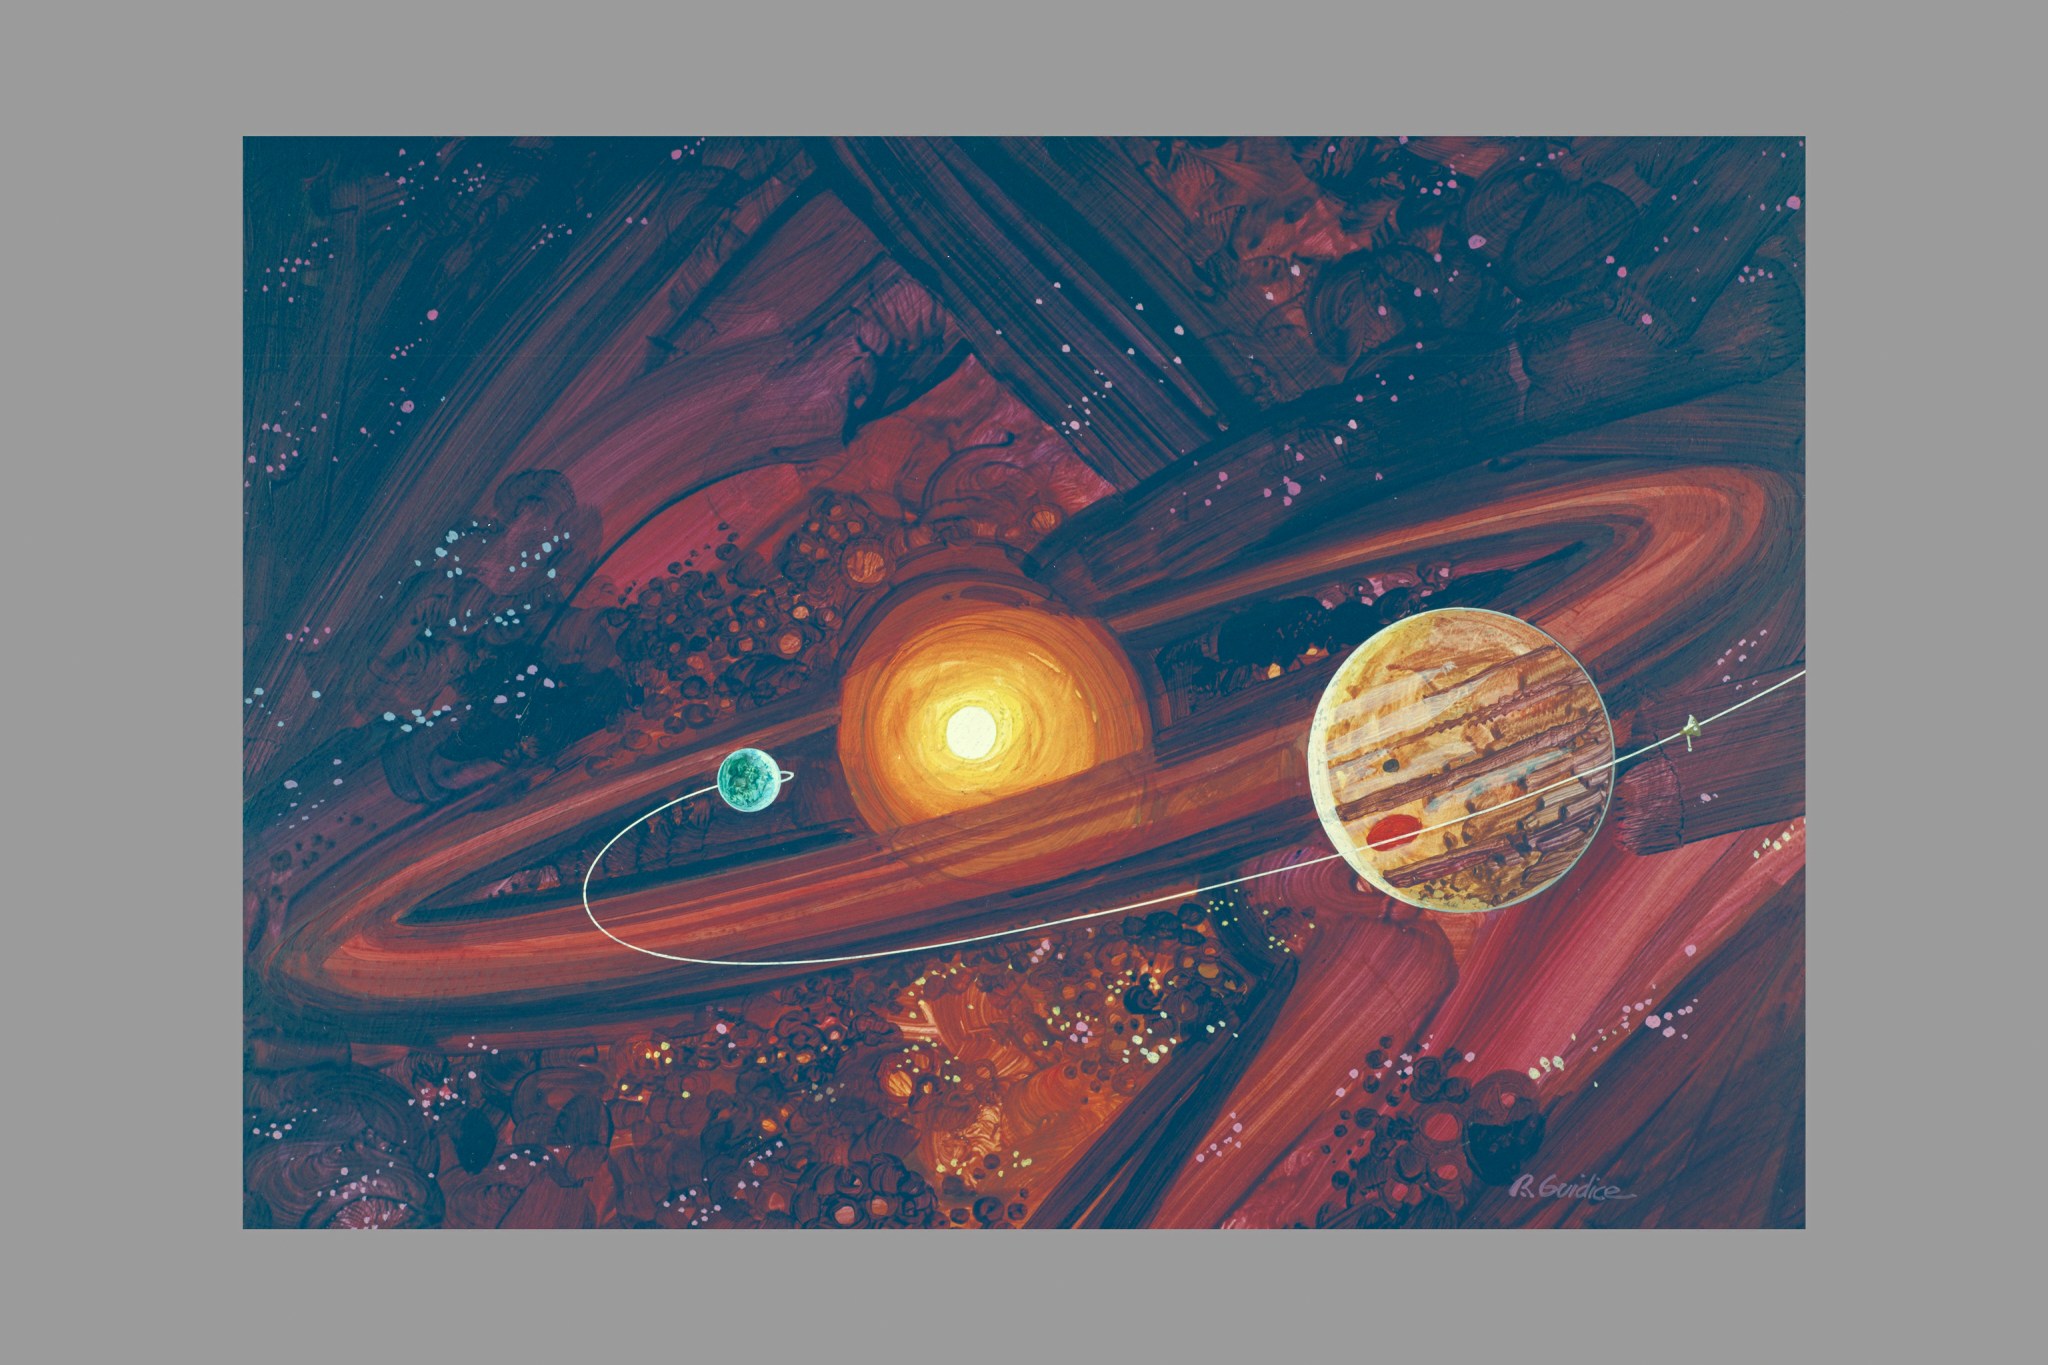 In this illustration, the Pioneer 10 spacecraft flies through the asteroid belt between Mars and Jupiter. The spacecraft is shown to the right of Jupiter (right), dwarfed by the planet's size. The white line representing Pioneer 10's path curls around Earth and past Jupiter. At the center, the Sun is represented in bright, luminous white and orange, while streaks of red, orange, purple, and black represent space. The image is dotted with spots of purple, blue, yellow, and white.